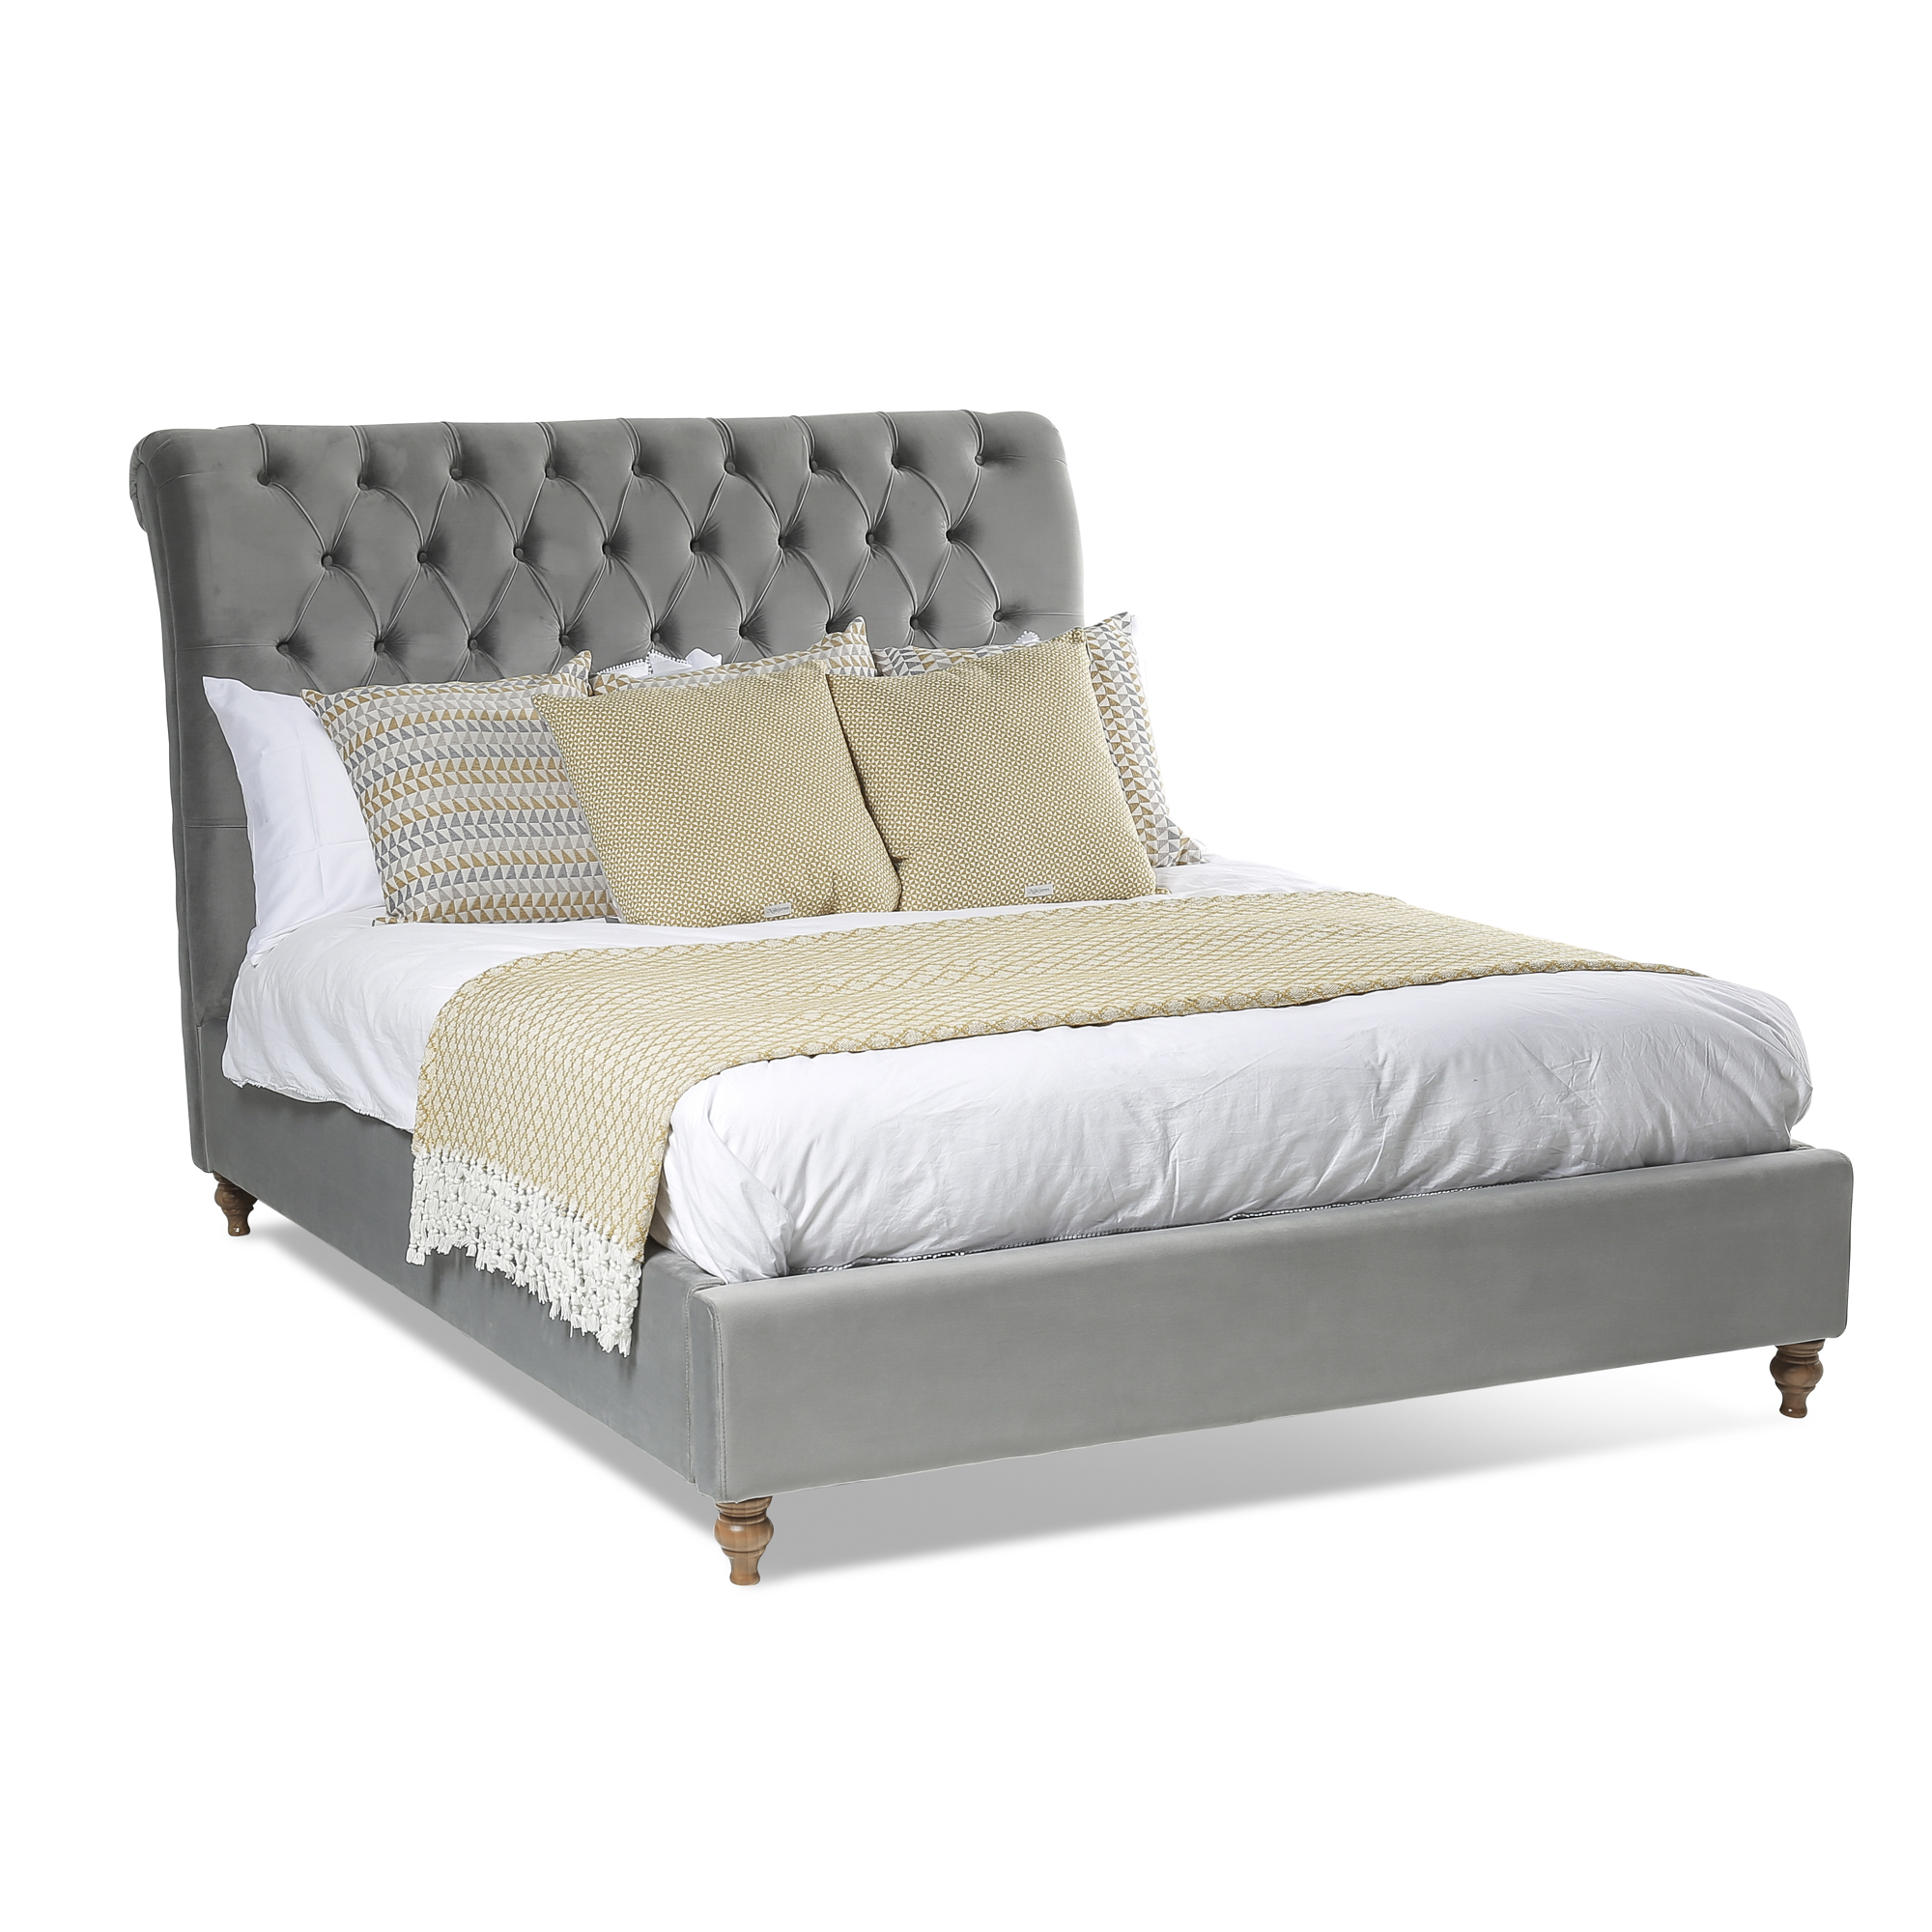 5ft Grey Chesterfield King Size Bed, Chesterfield Bed King